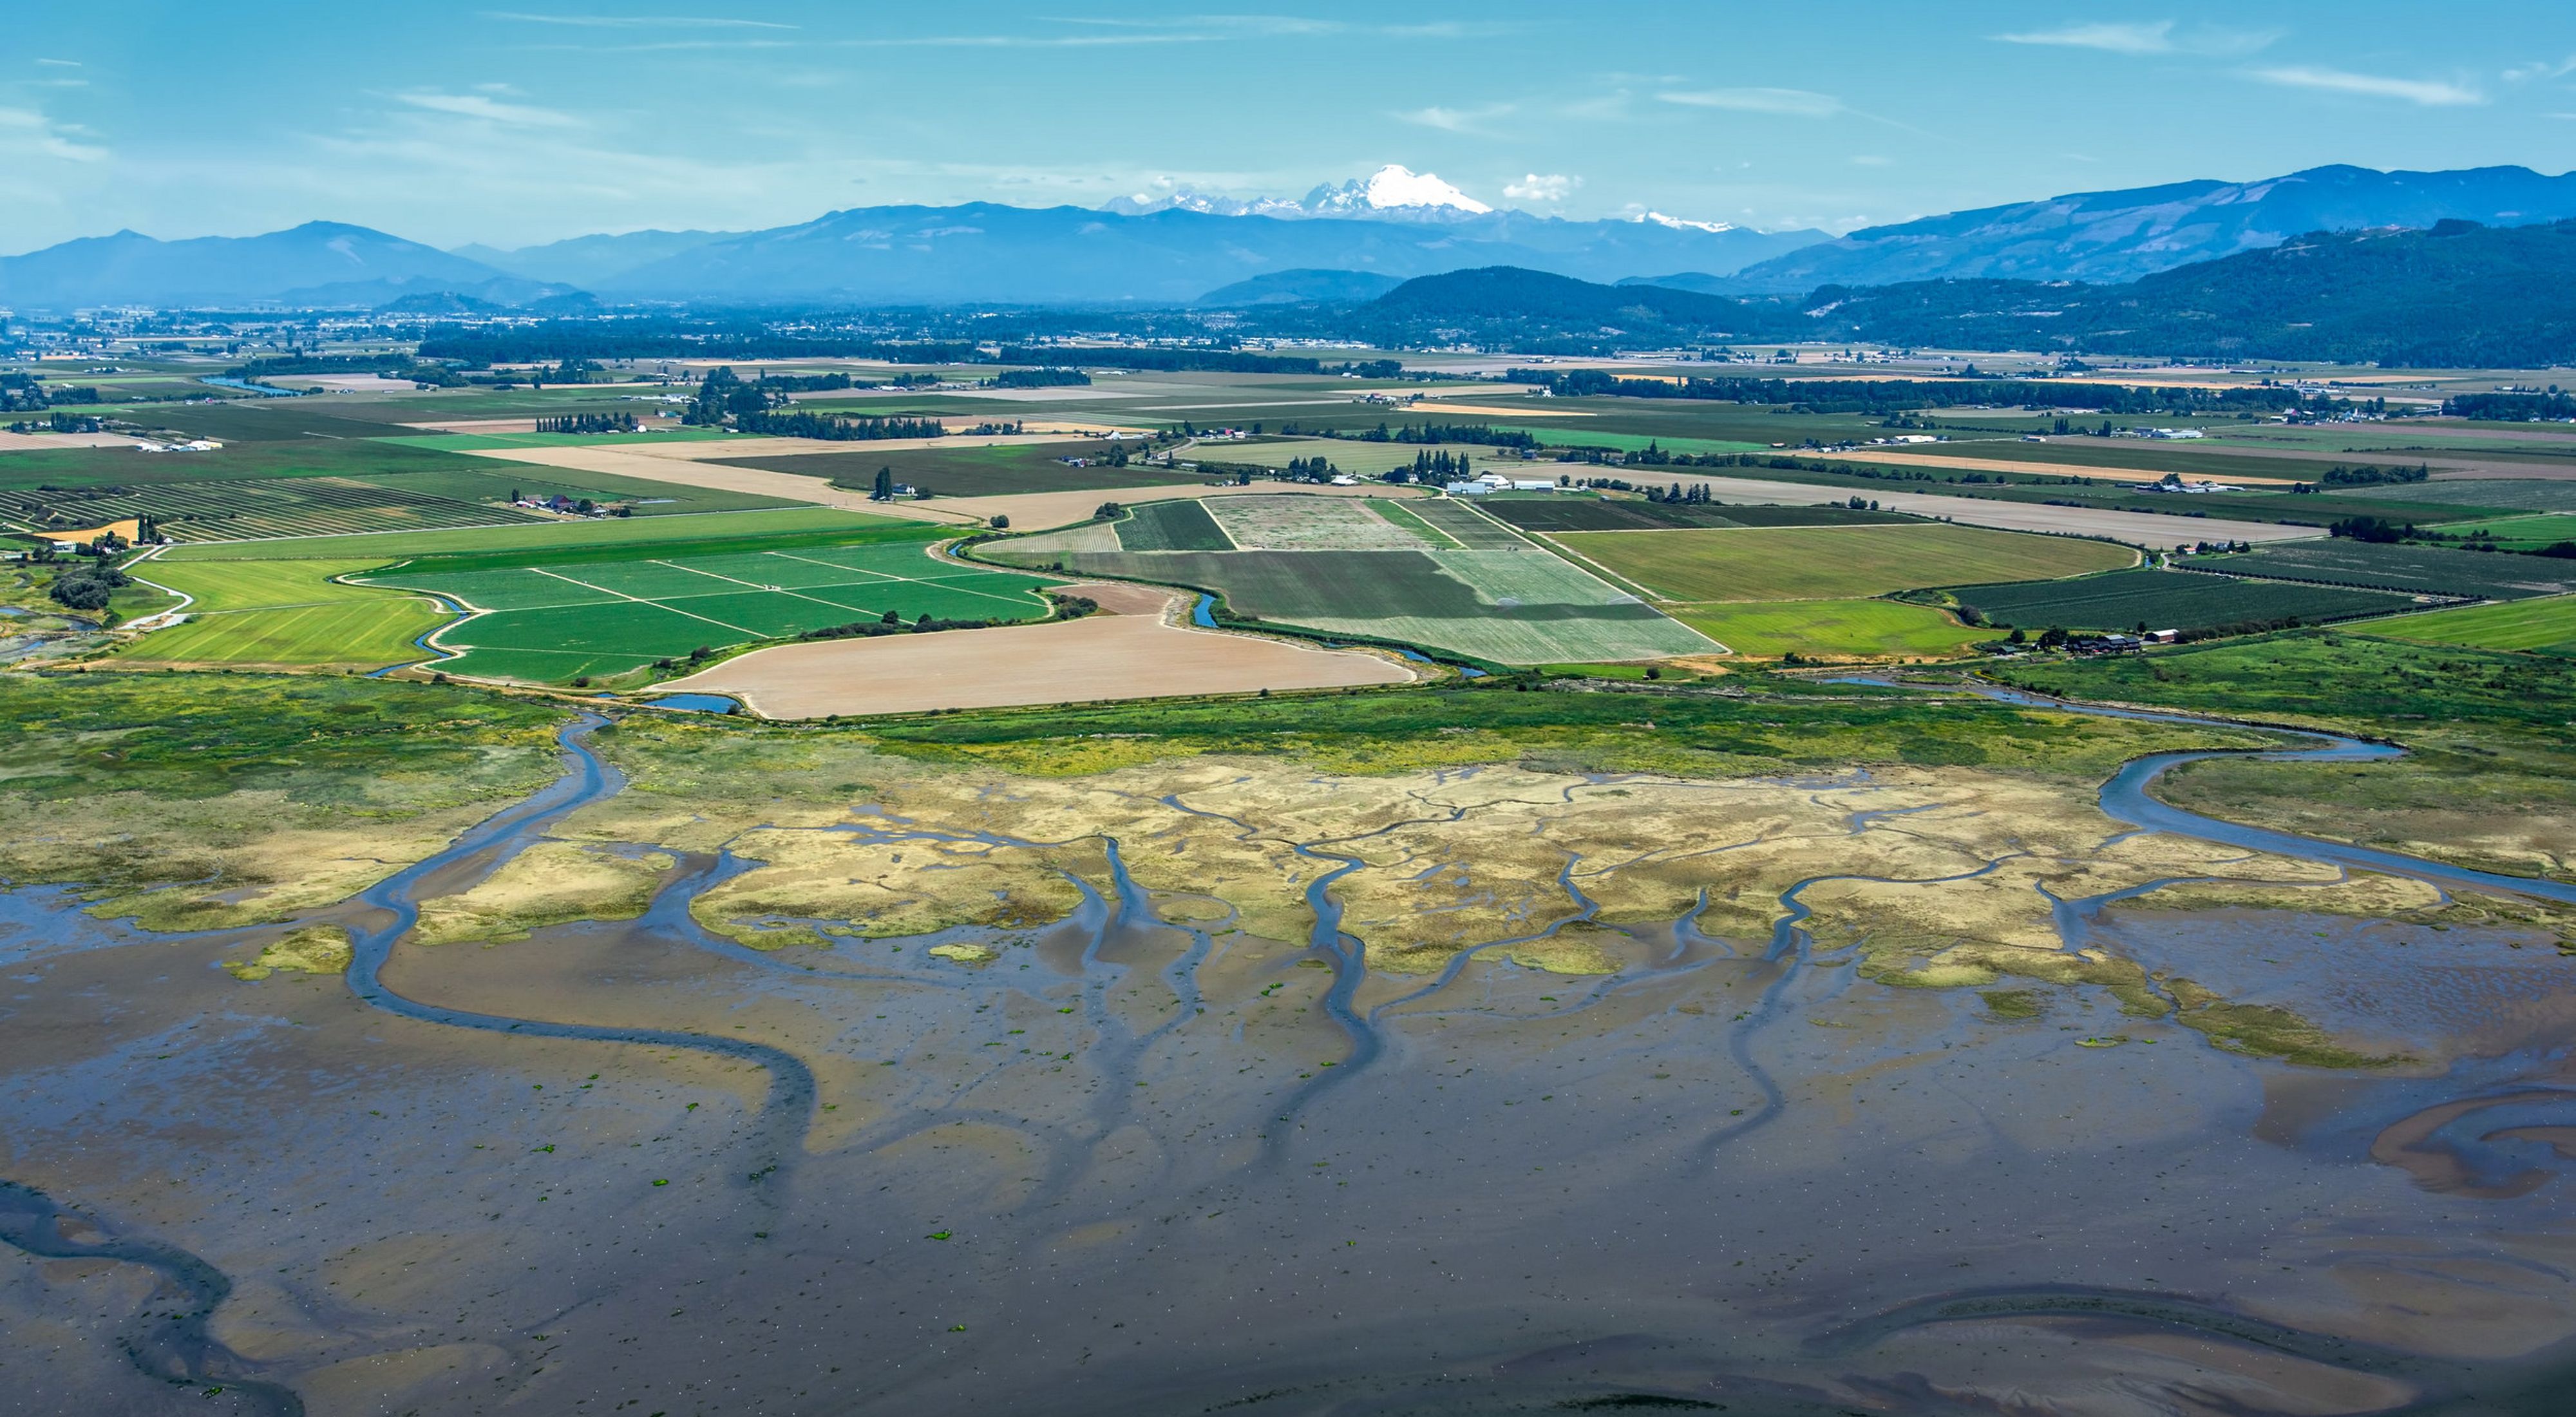 farms and floopdplains, amongst the Cascade Mountains in the background. 